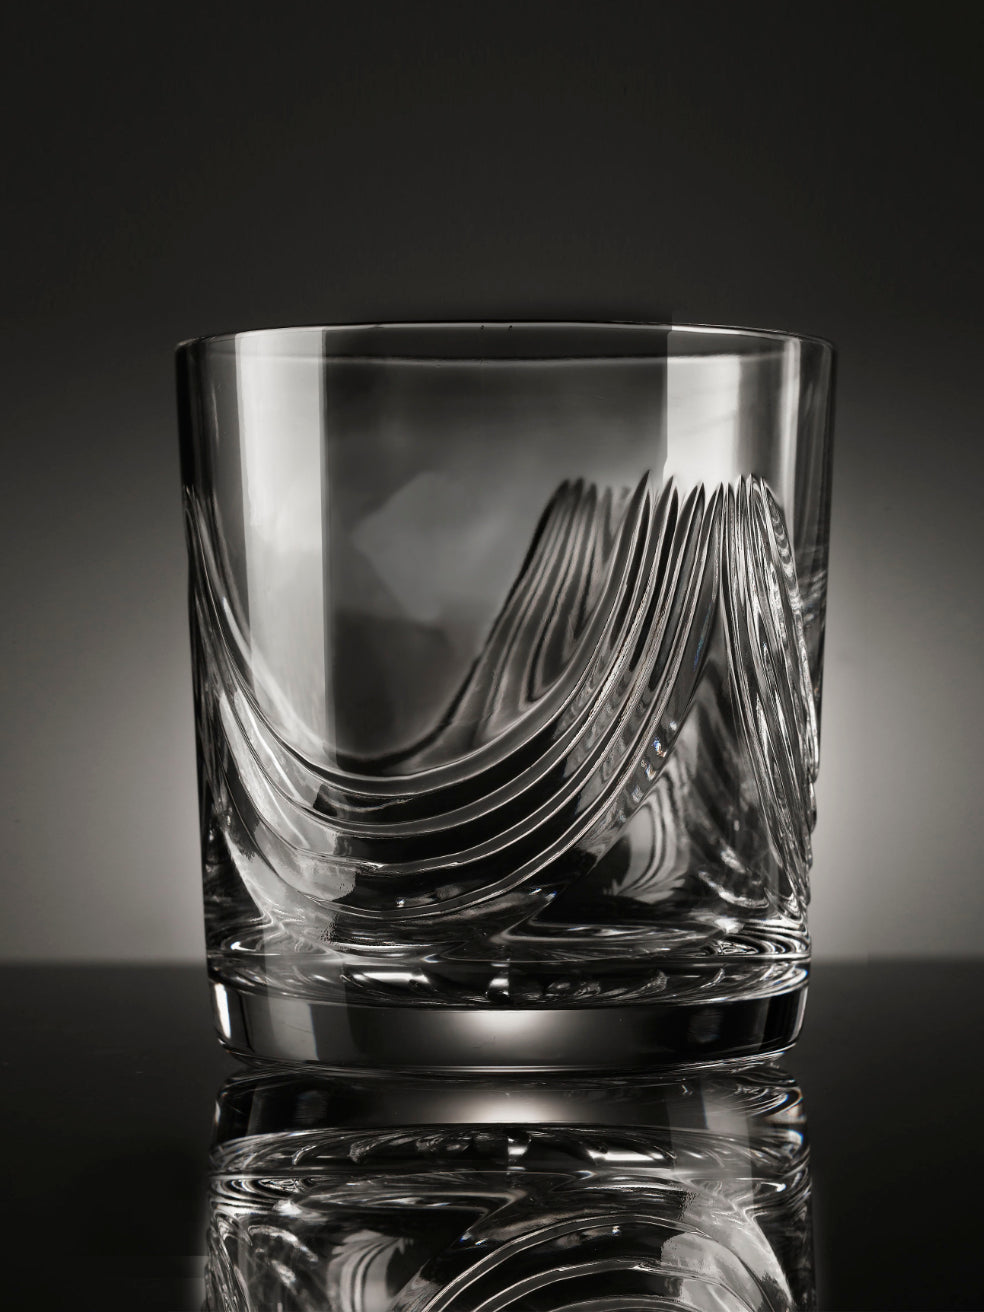 The beautiful hand-cut Montrose tumbler features sweeping cuts on the glassware inspired by the folds of the Scottish kilts. 